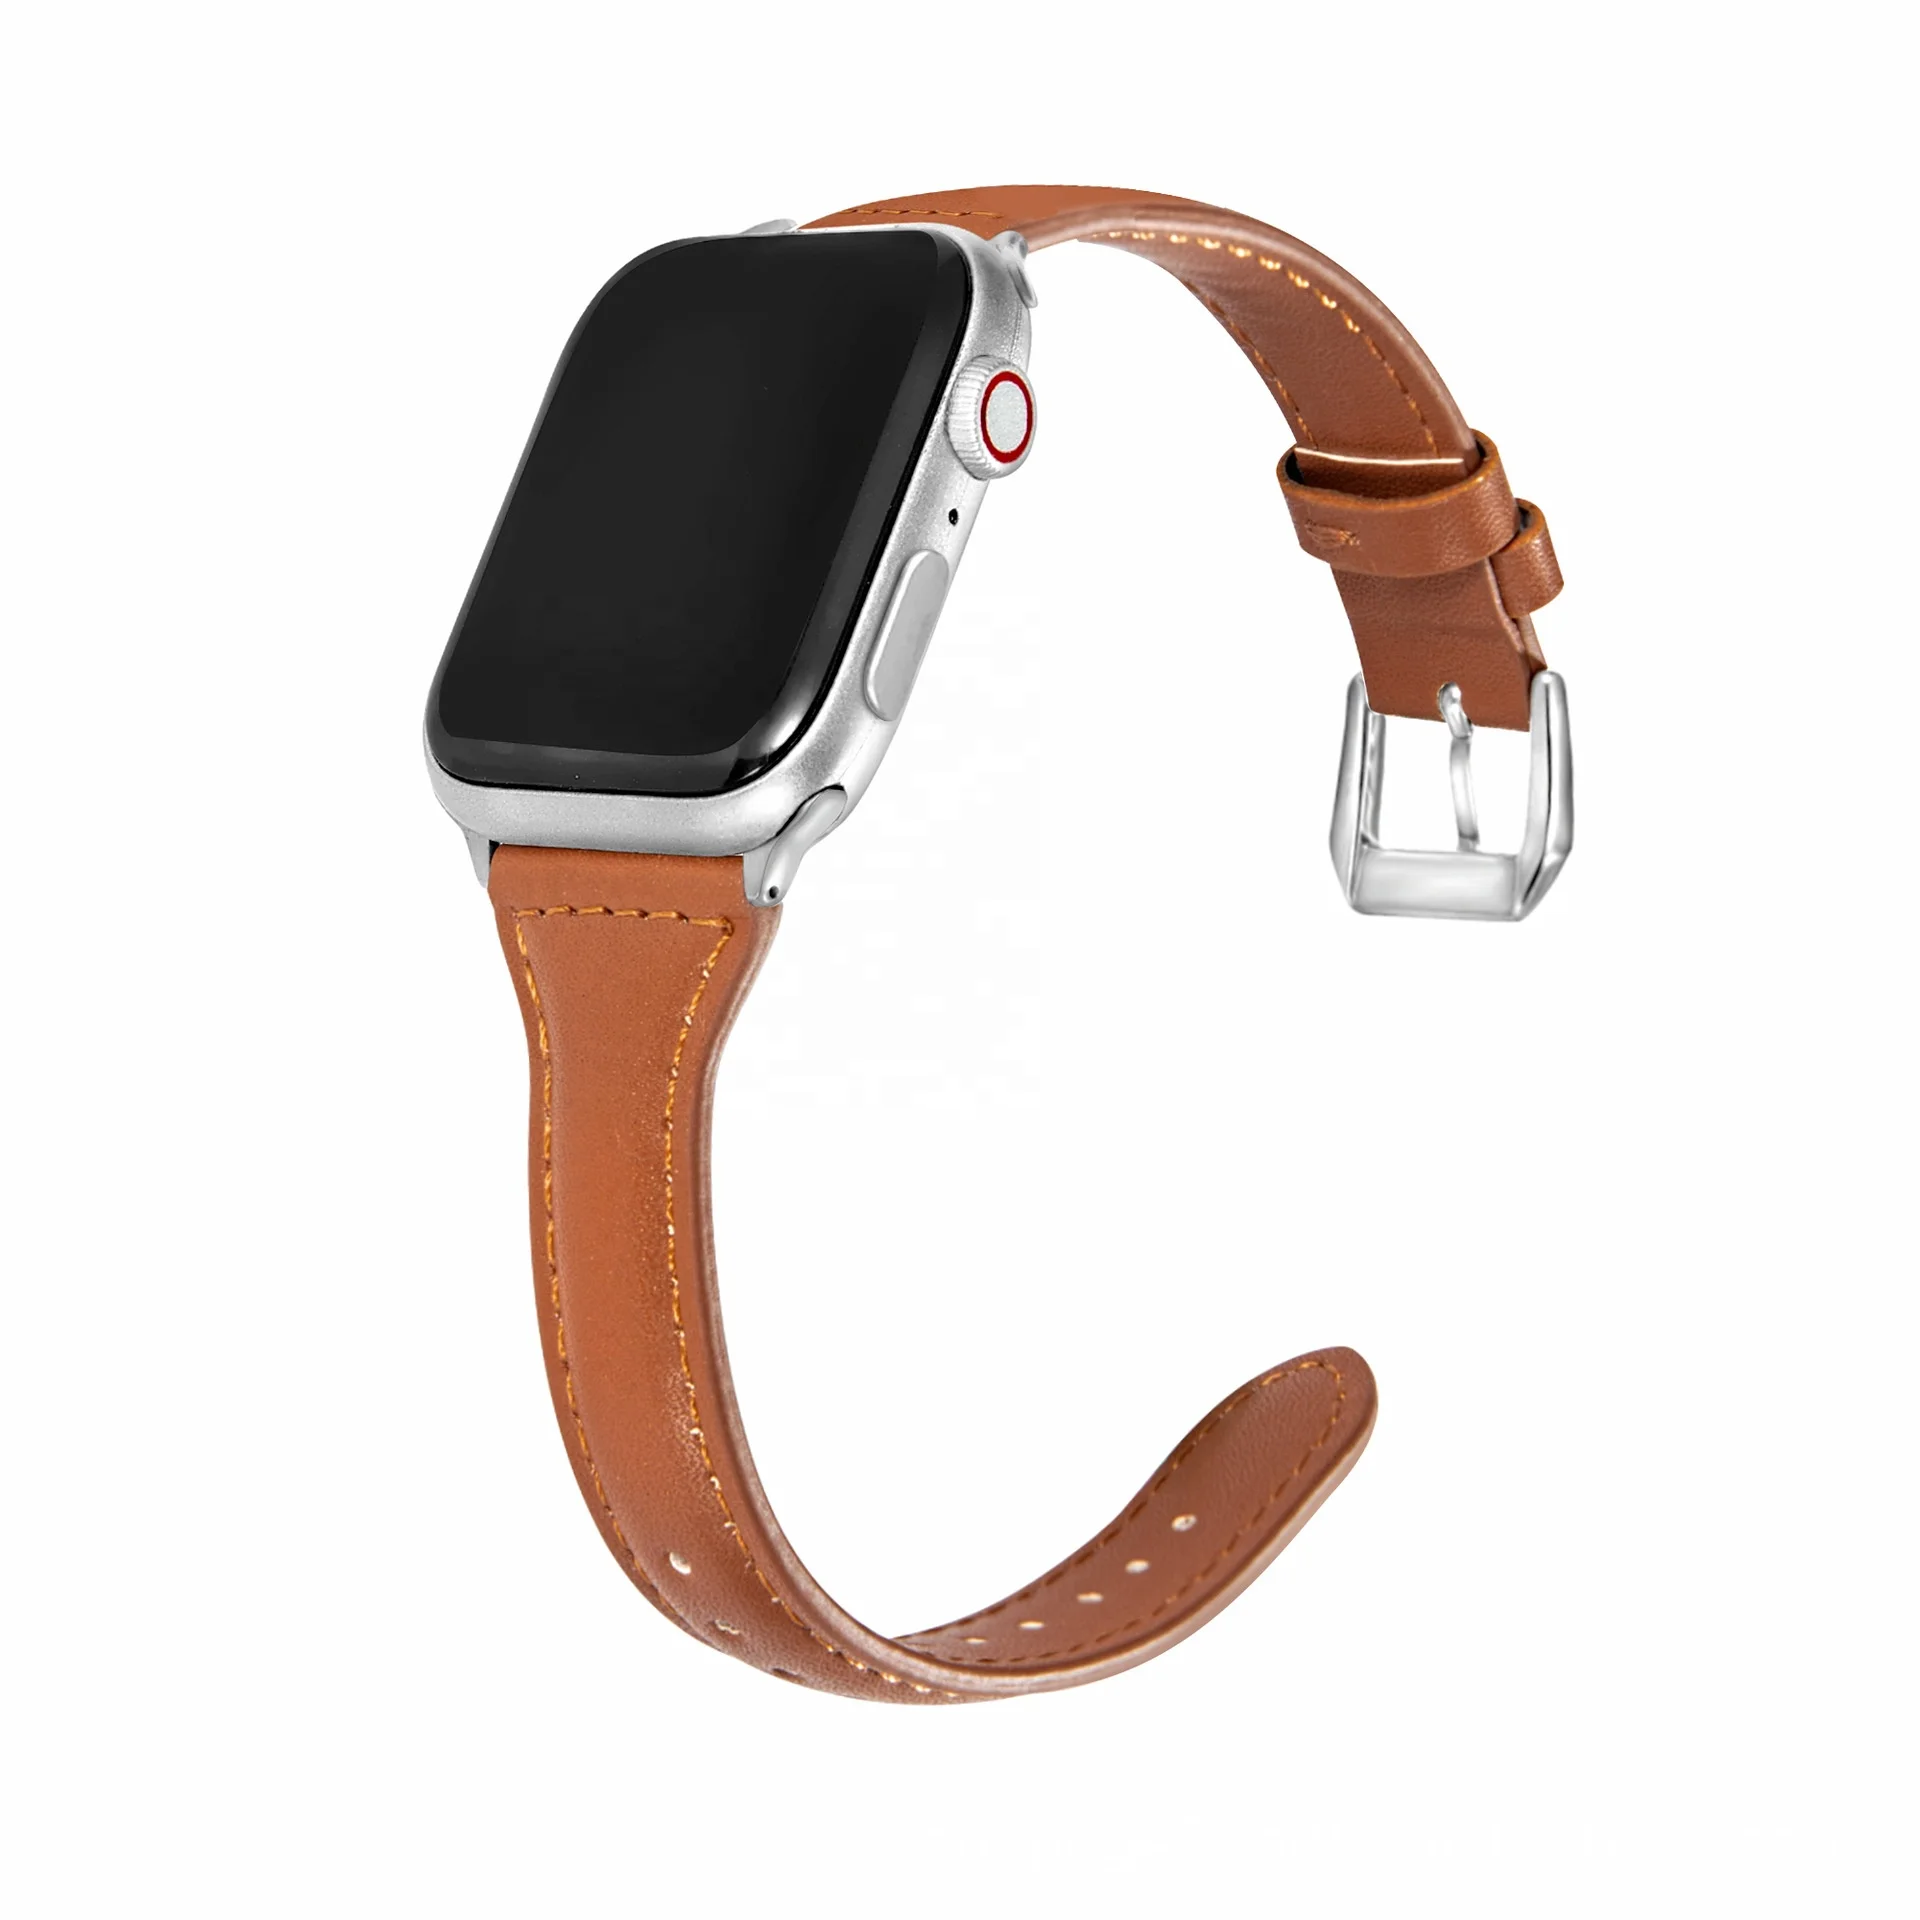 

Amazon Leather Loop Strap for Apple Watch Band for Apple Watch 42mm 44mm 38mm 40mm for Iwatch 3/2/1, White, red, black, brown, mint green, haze blue